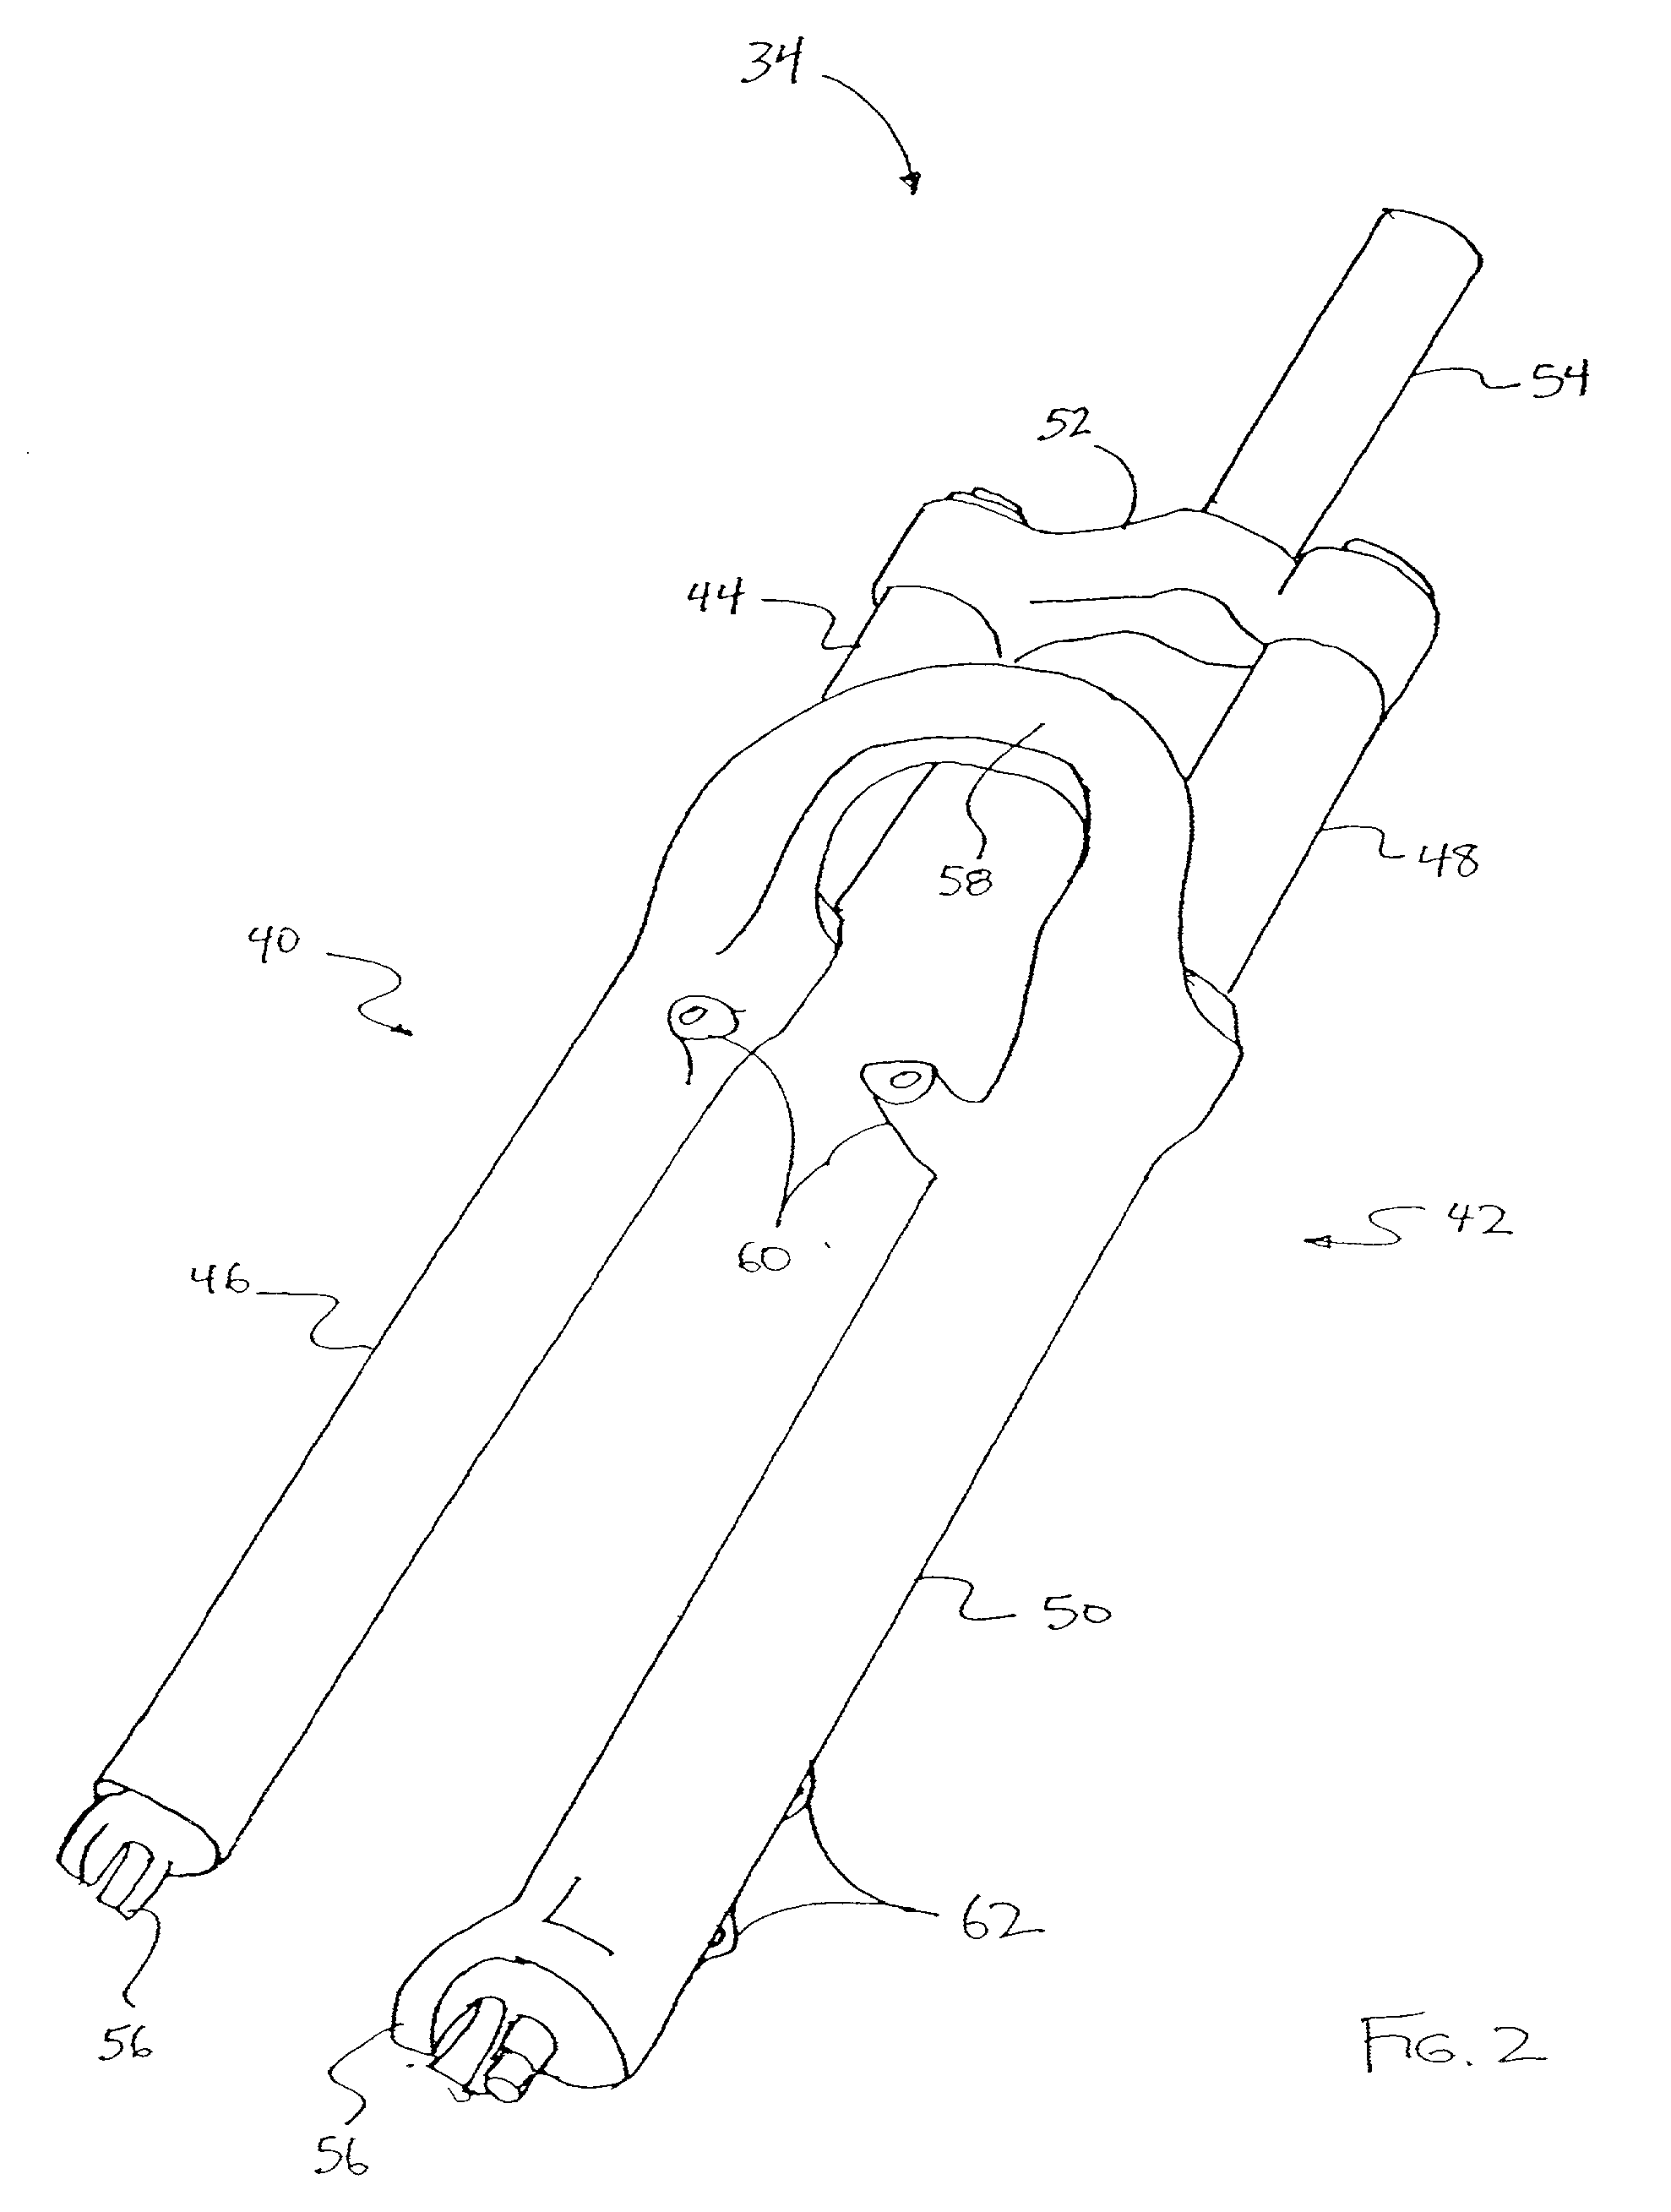 Bicycle fork cartridge assembly